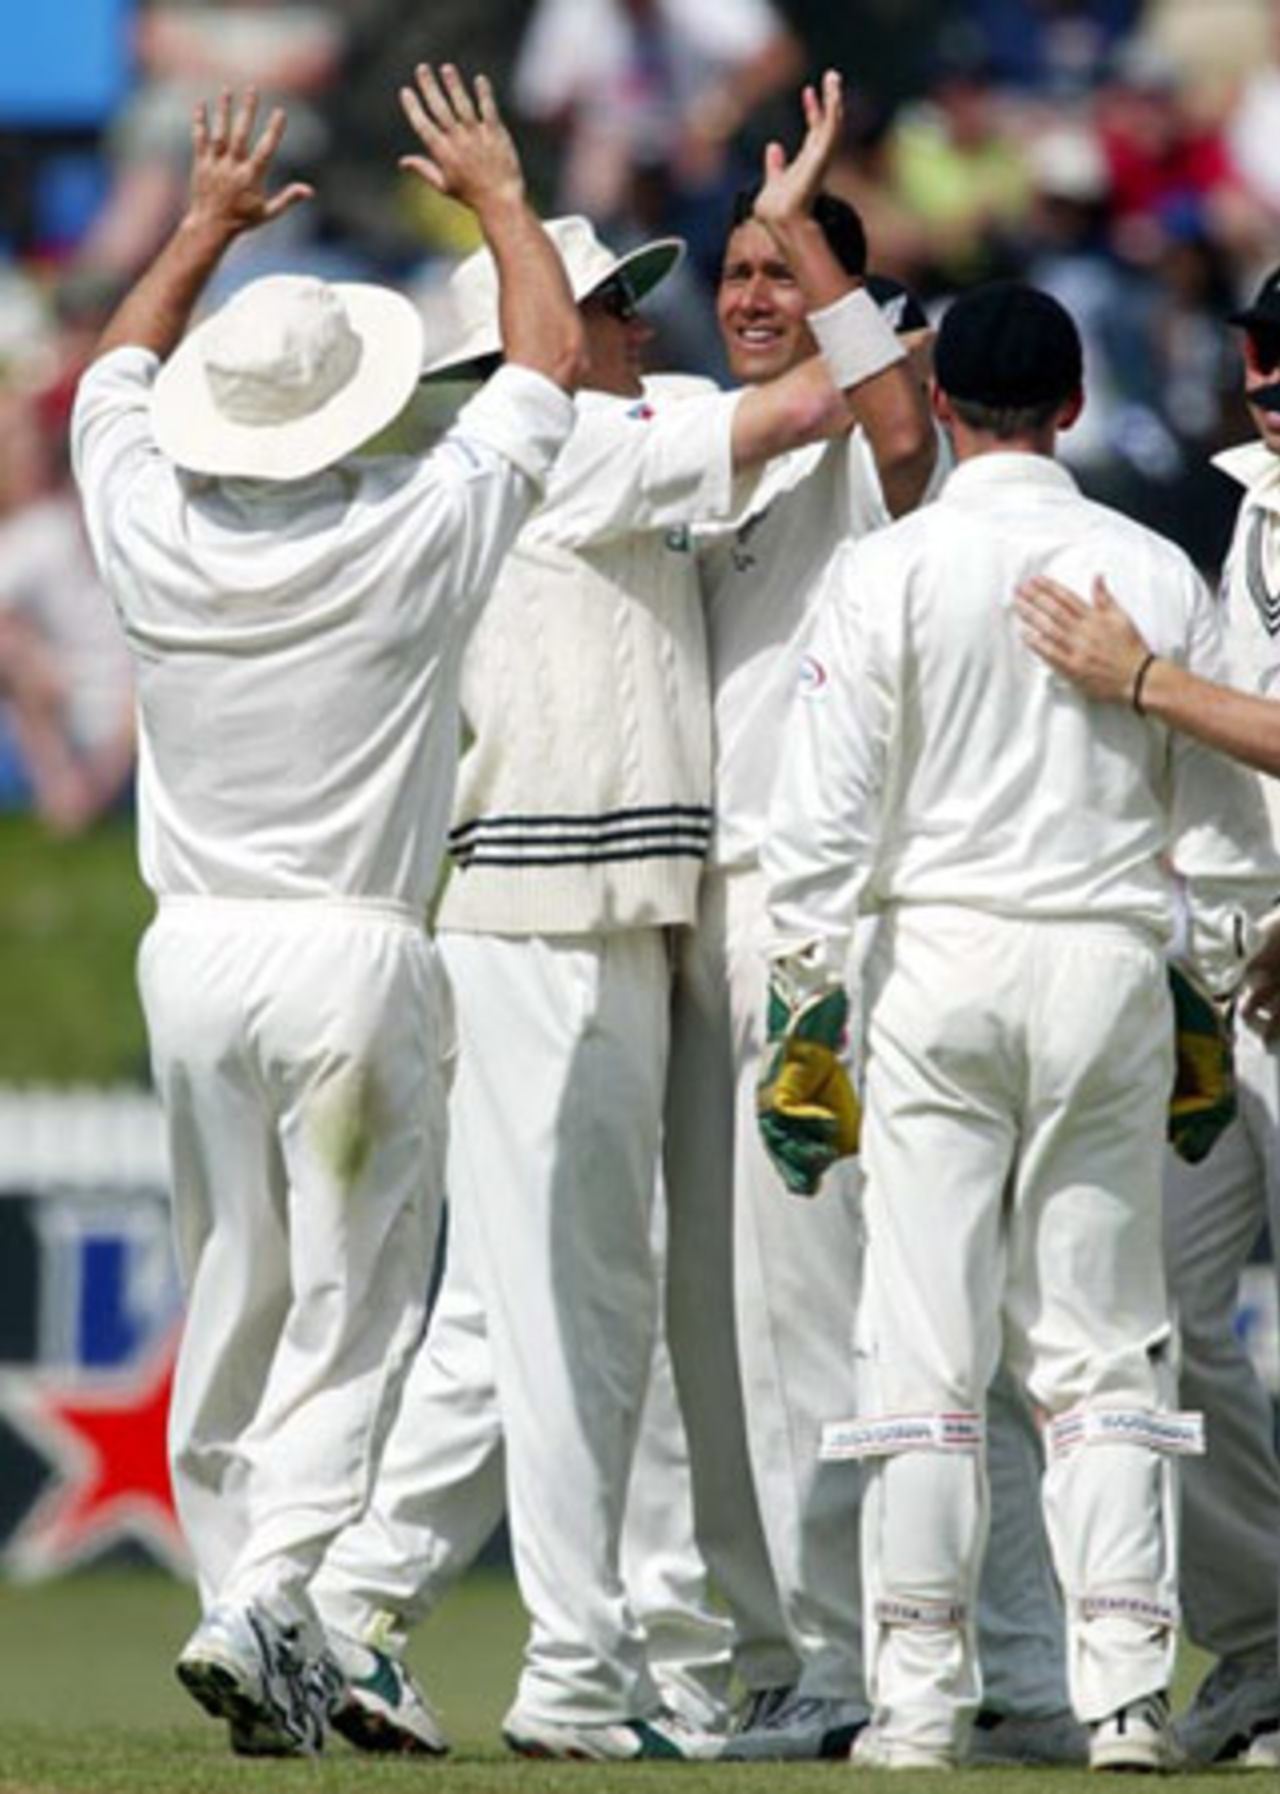 Members of the New Zealand team celebrate the dismissal of Indian batsman Sachin Tendulkar, bowled by Daryl Tuffey for 32 in his second innings. From left: Mark Richardson (facing away), sub fielder Michael Mason, Tuffey and Robbie Hart. 2nd Test: New Zealand v India at Westpac Park, Hamilton, 19-23 December 2002 (21 December 2002).